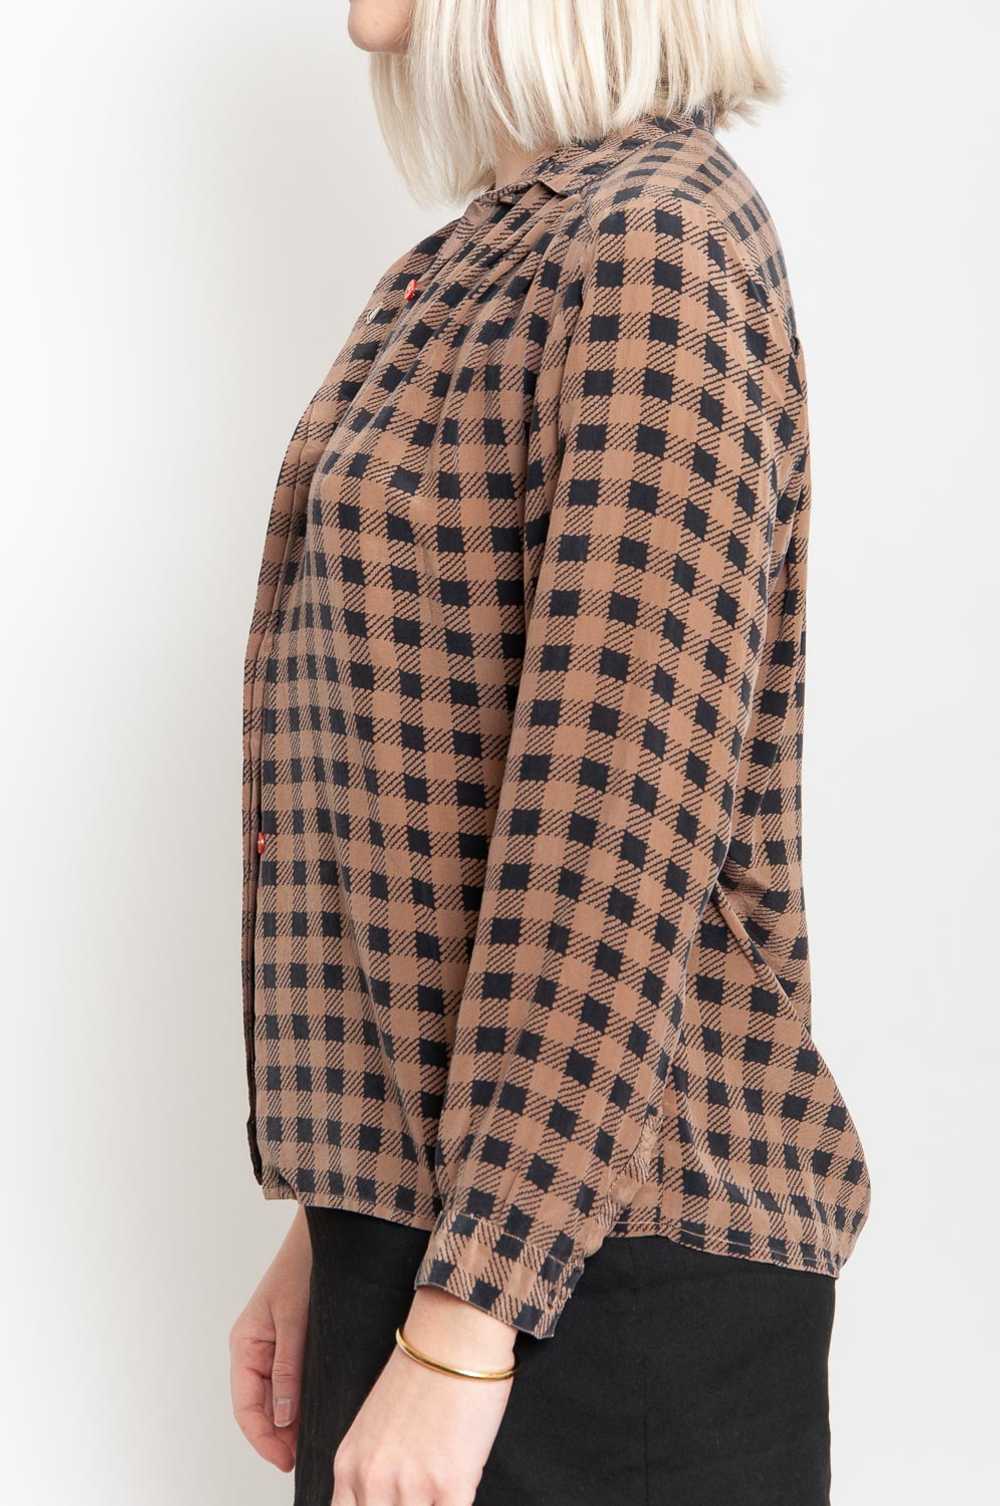 Checked silk blouse long sleeve Brown-Black - image 3